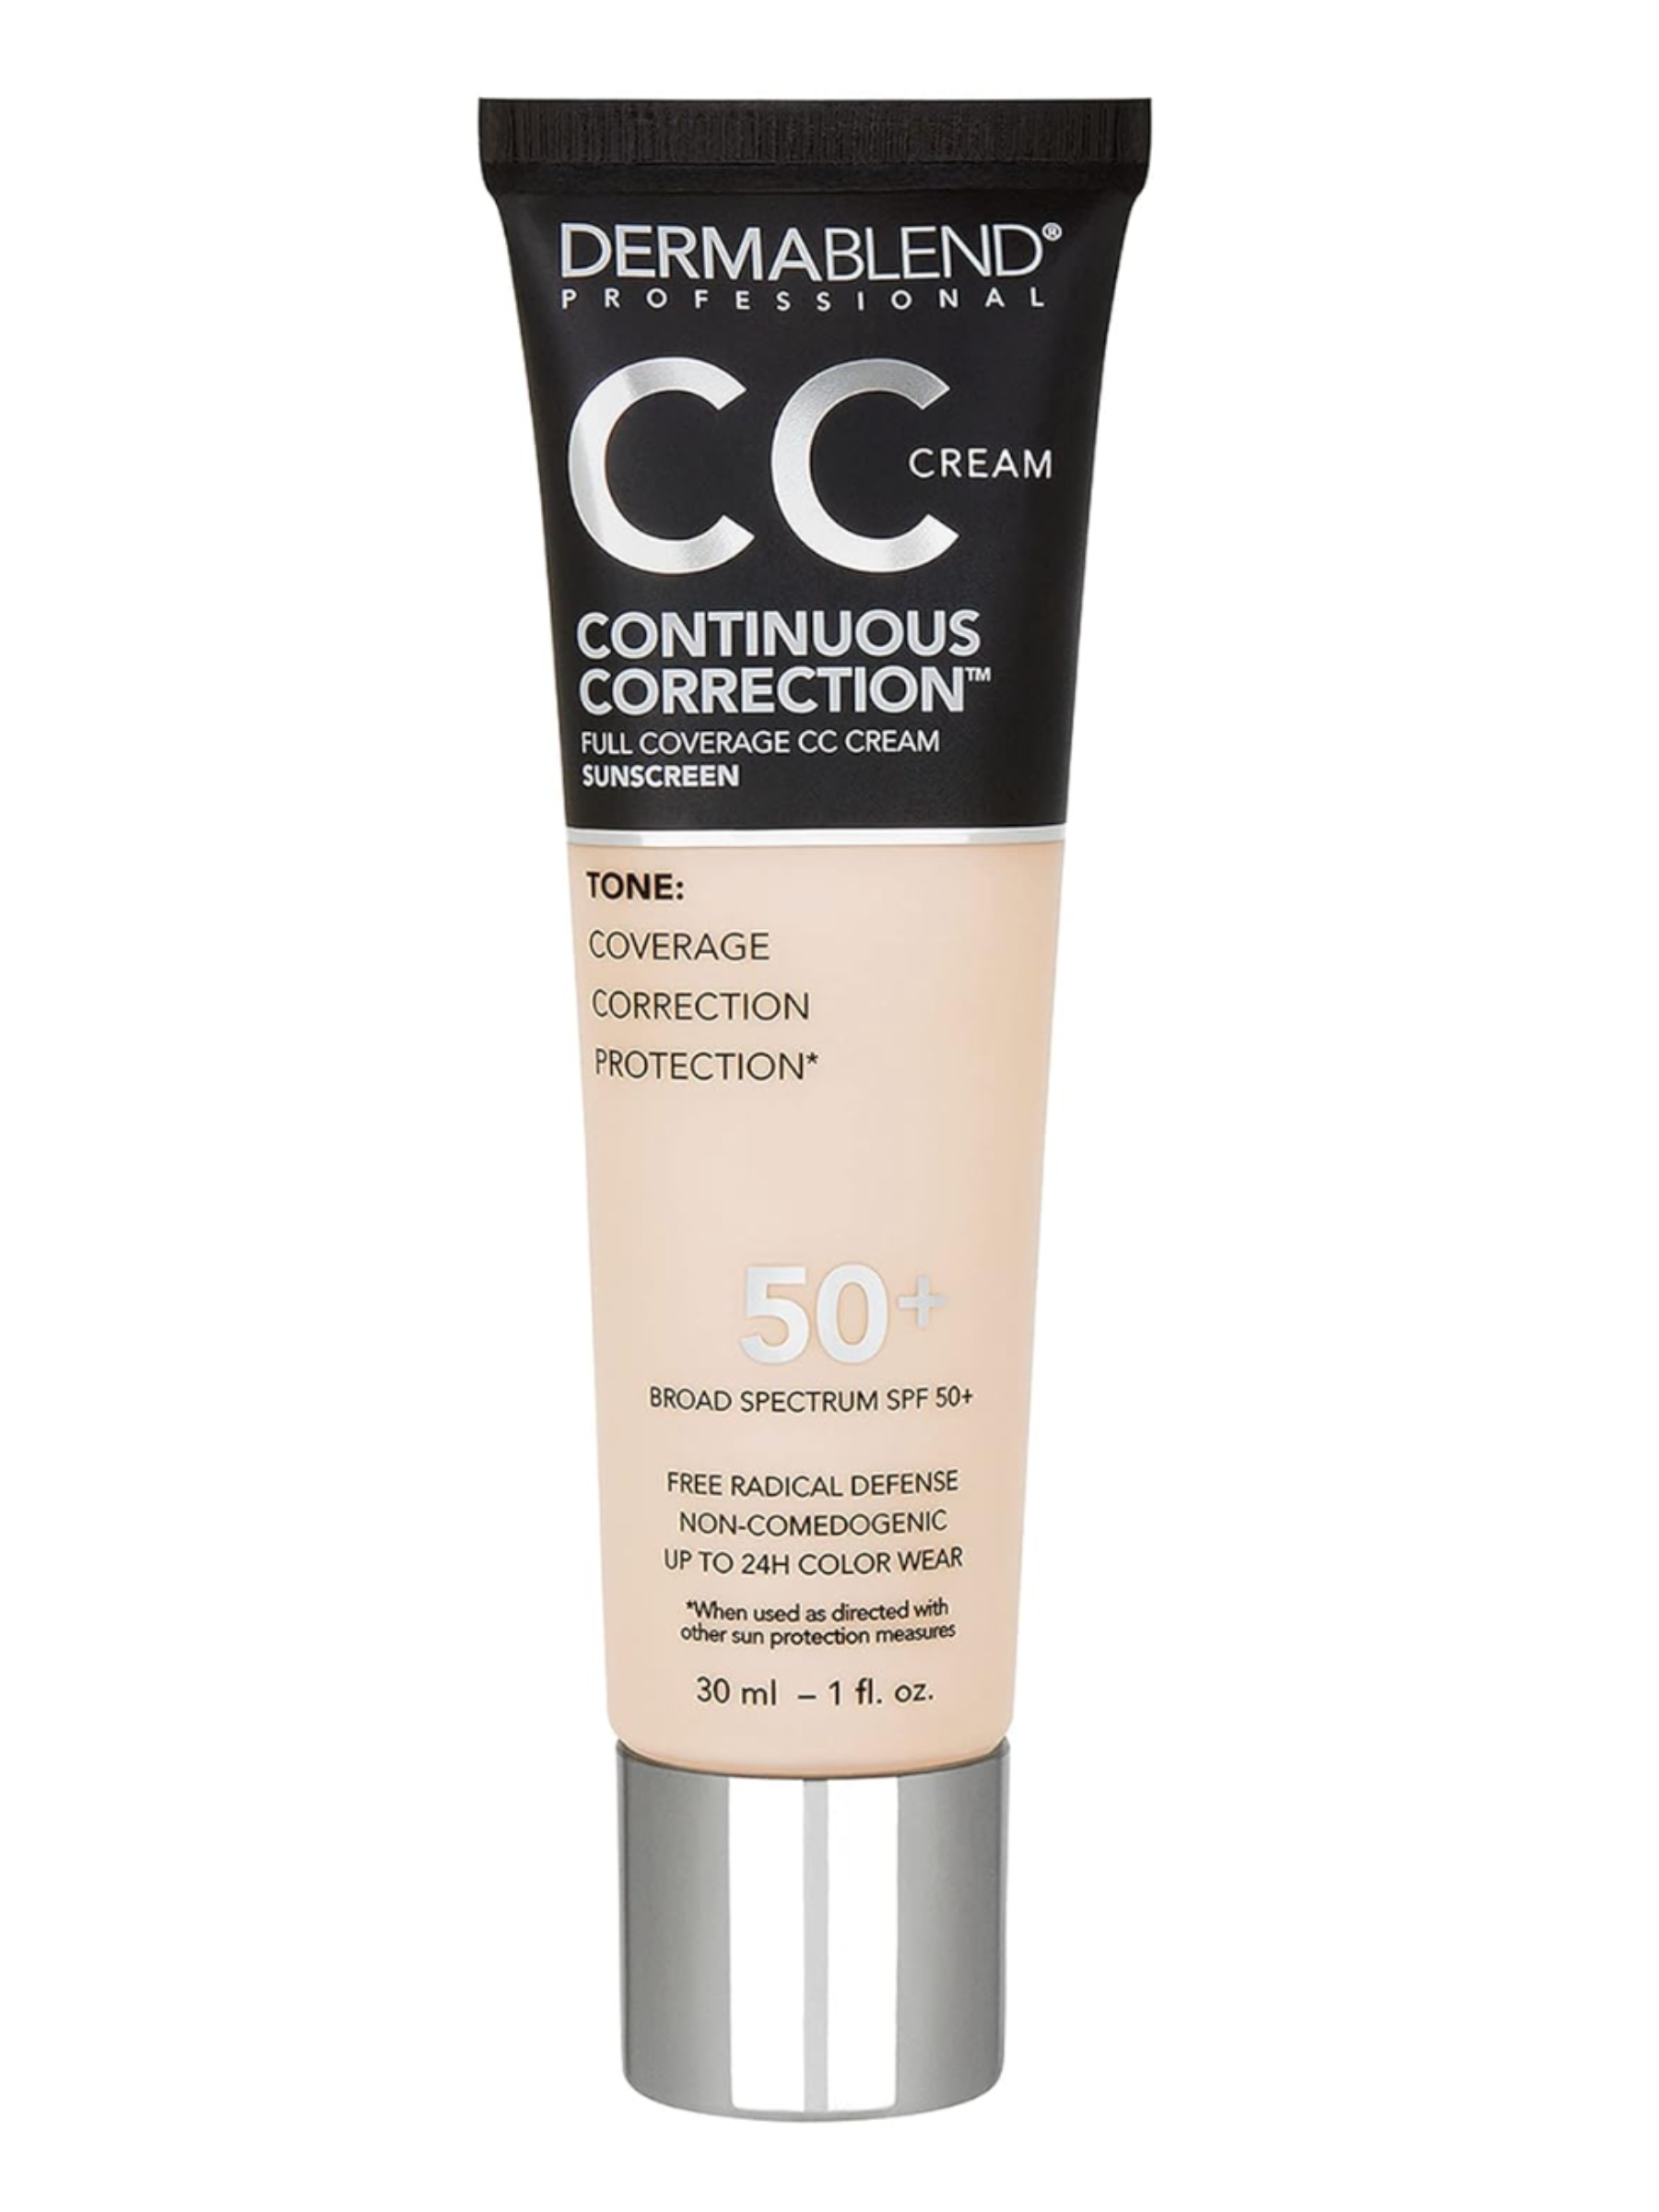 <p>With a full-coverage color payoff, noncomedogenic formula, and a breathable matte finish, Dermablend Tone-Evening CC Cream is a no-brainer for oily and acne-prone skin types alike. Best of all, its fade-defying coverage lasts a whopping 24 hours, keeping makeup looking fresh all day long. The CC cream also boasts a broad spectrum SPF of 50+ and a blend of antioxidants that help neutralize skin damage and protect against environmental stressors. Plus, the vegan, fragrance-free formula is both allergy- and sensitive skin-approved, meaning it plays nice with even the finickiest skin types.</p> <p><strong>Size:</strong> 1 ounce / <strong>Shades:</strong> 16 / <strong>Key Ingredients:</strong> Niacinamide, vitamin E, caffeine / <strong>Finish:</strong> Matte / <strong>SPF:</strong> 50+</p> <ul> <li><strong>Pros</strong>: Full but natural-looking coverage, noncomedogenic formula</li> <li><strong>Cons</strong>: Transfers</li> </ul> $41, Amazon. <a href="https://www.amazon.com/Dermablend-Continuous-Correction-Tone-Evening-Foundation/dp/B08WJ3TFCS">Get it now!</a><p>Sign up for today’s biggest stories, from pop culture to politics.</p><a href="https://www.glamour.com/newsletter/news?sourceCode=msnsend">Sign Up</a>